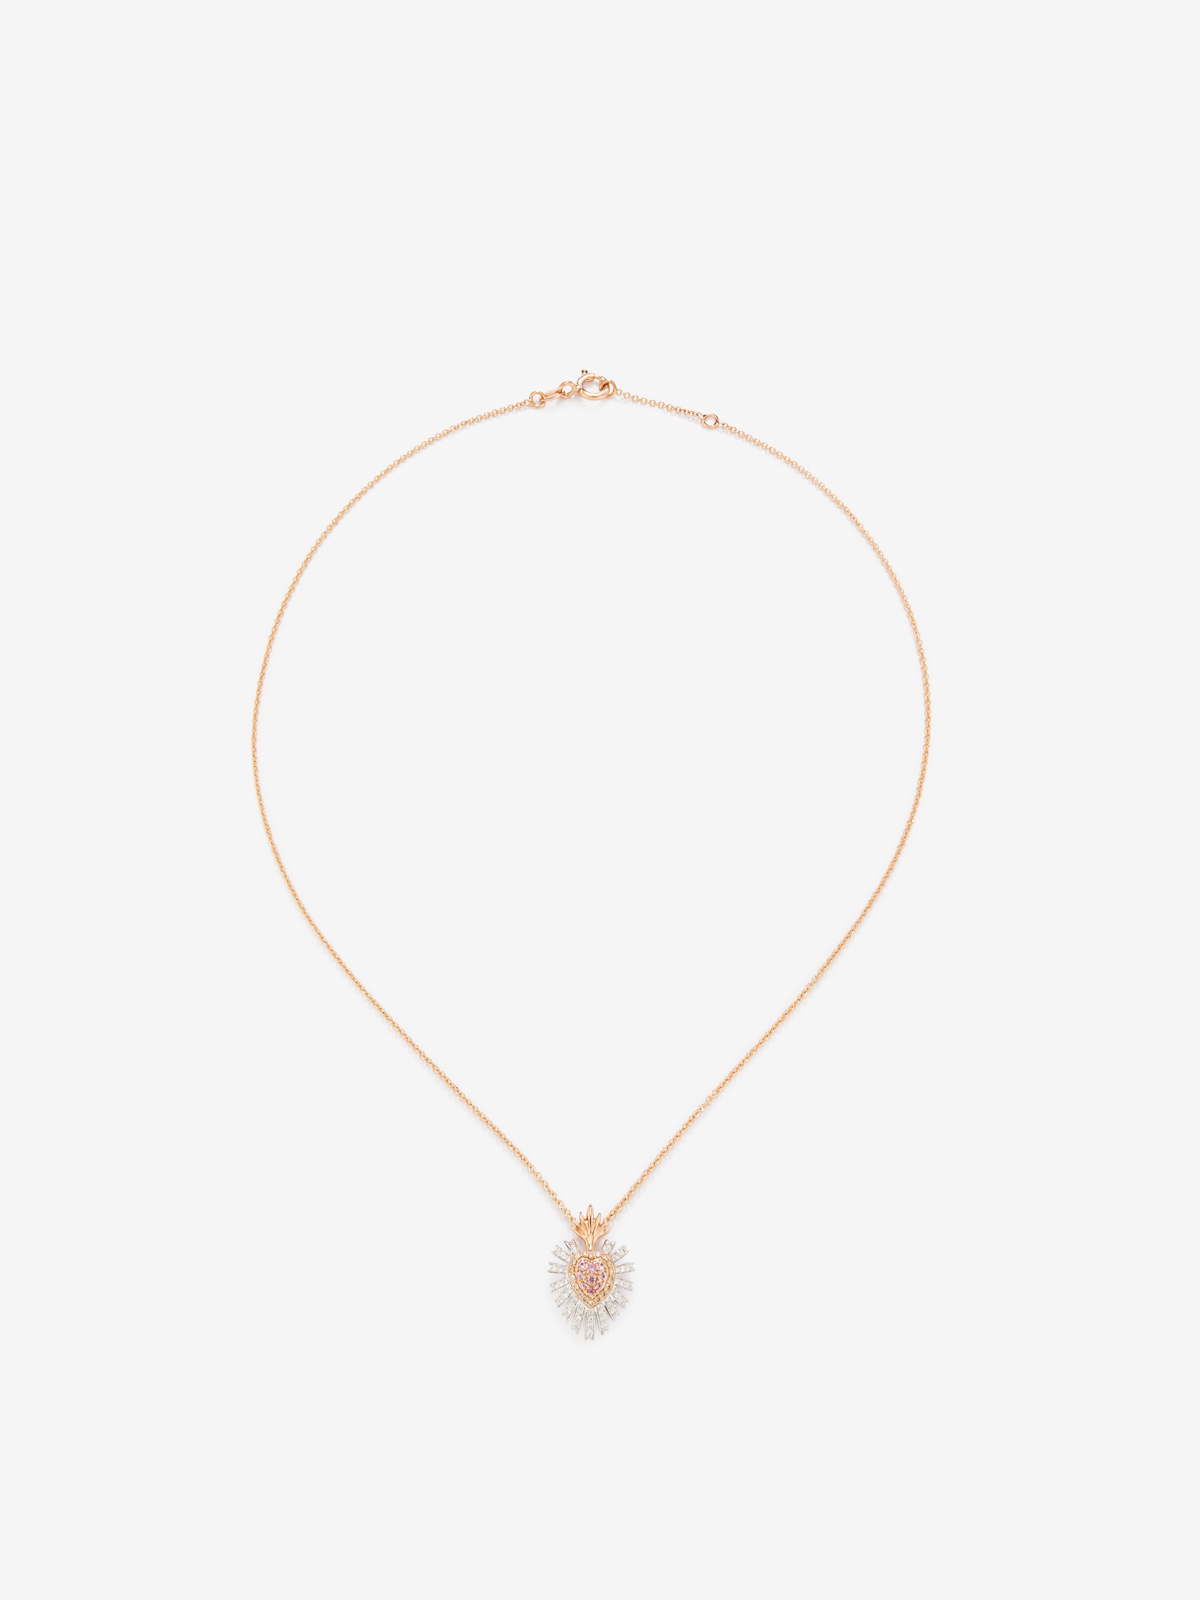 18K Rose Gold Heart Pendant Chain with Sapphire and Diamond